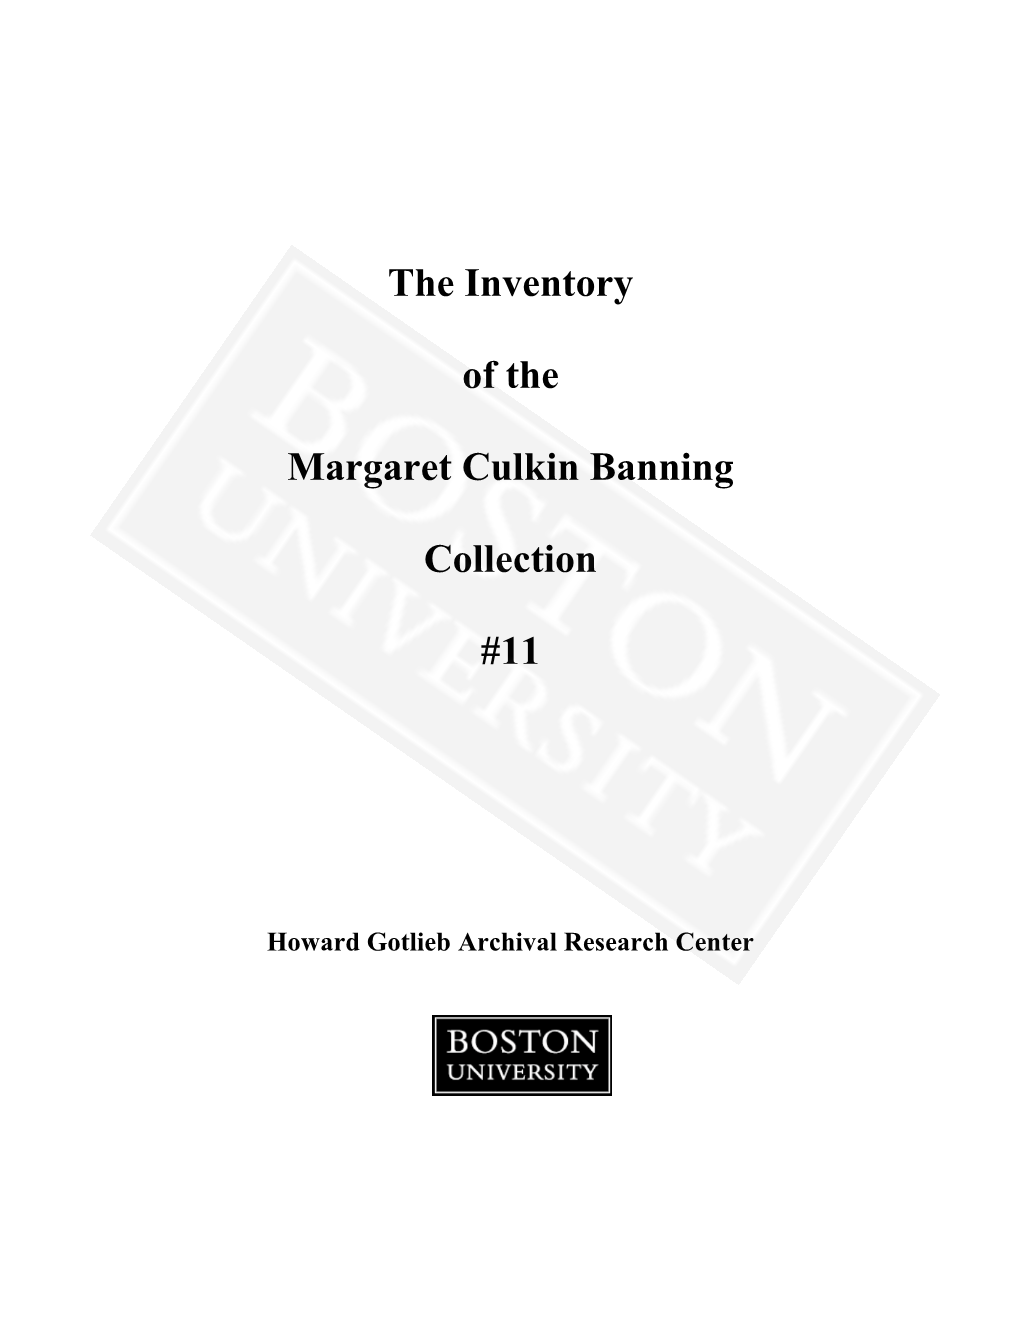 The Inventory of the Margaret Culkin Banning Collection